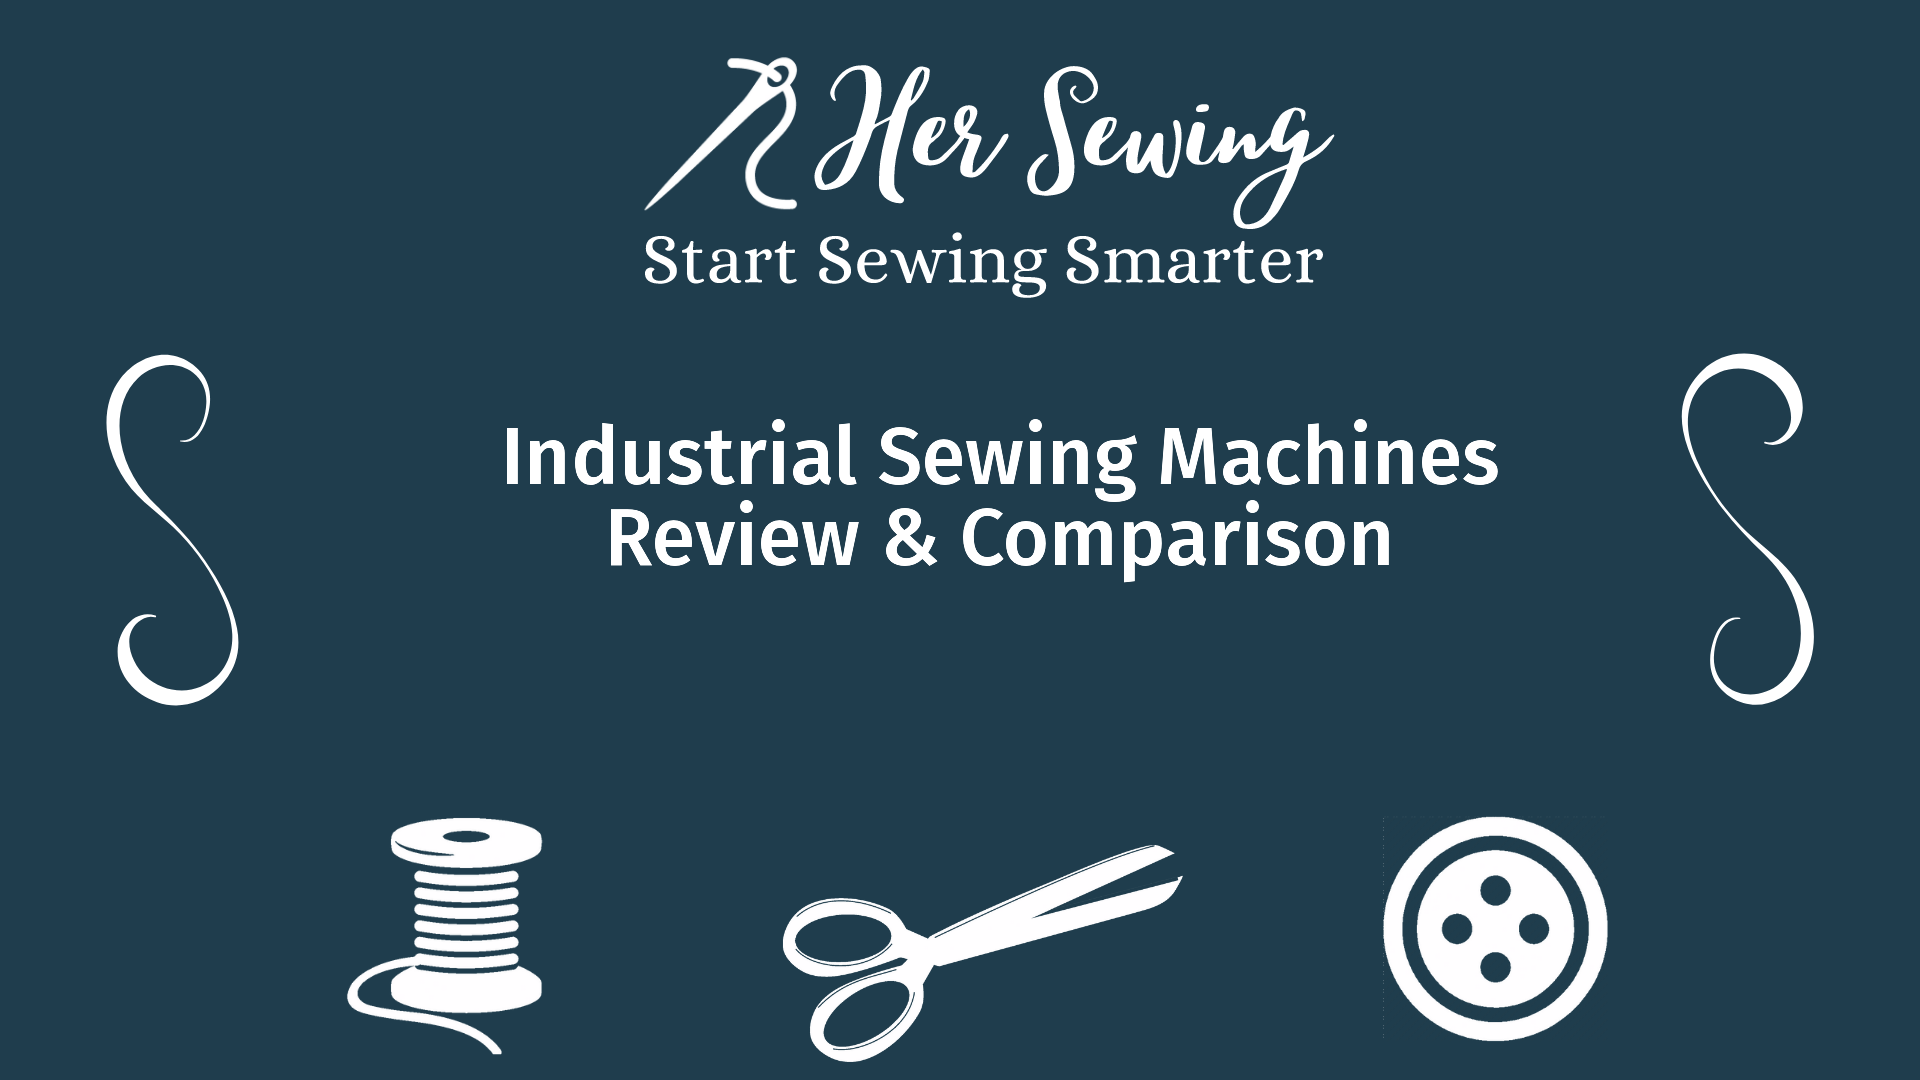 Industrial Sewing Machines Review & Comparison